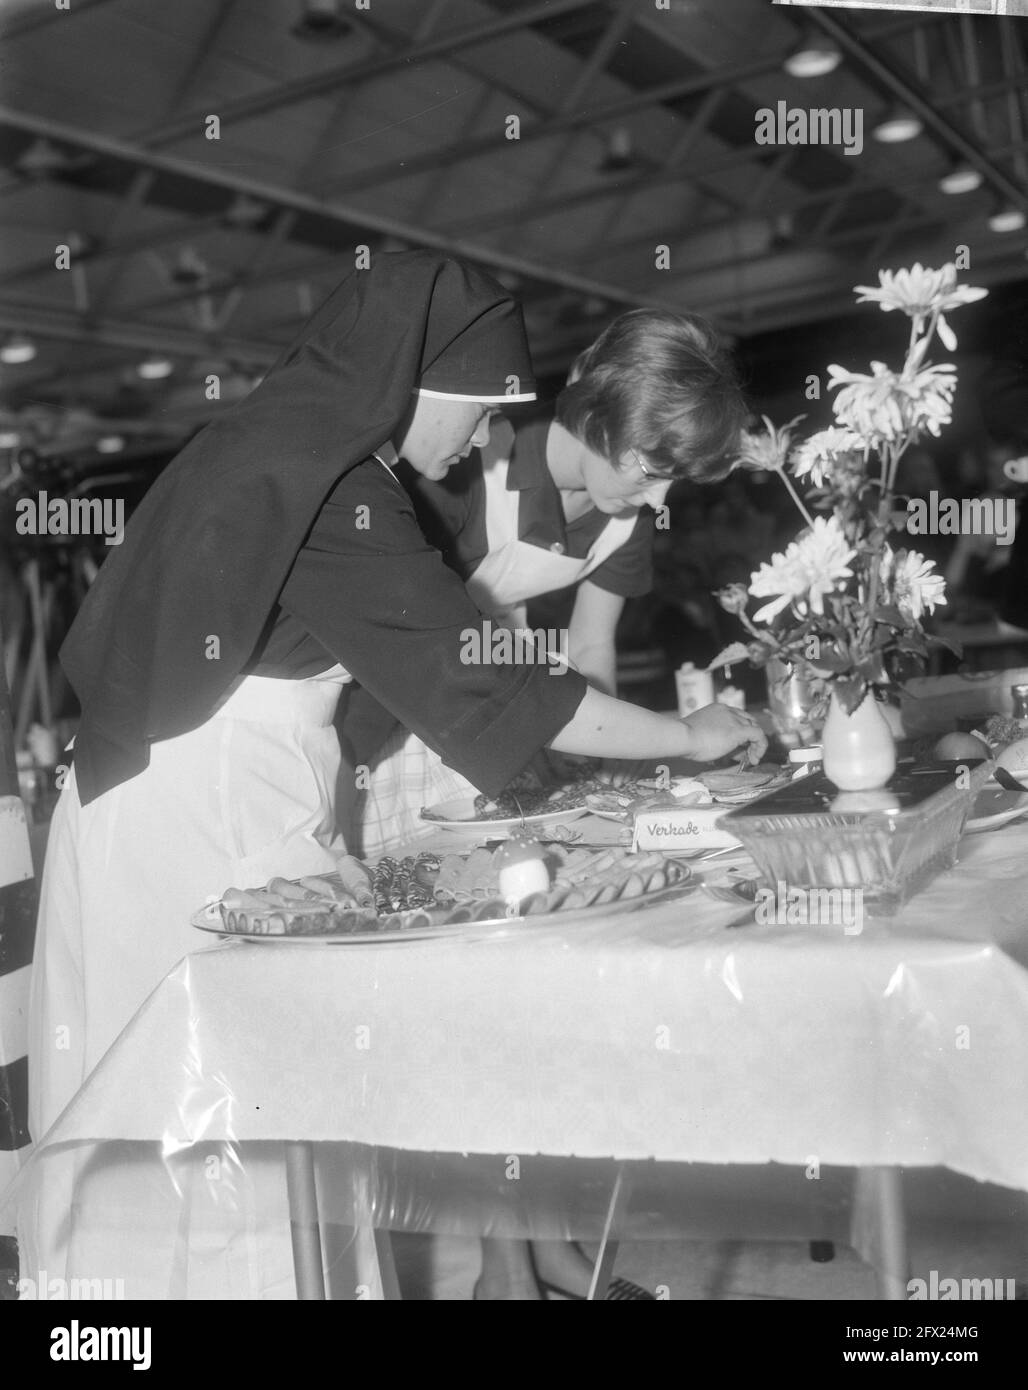 Pupil and a nun while preparing dishes, November 18, 1965, demonstrations, domestic schools, cooks, cooking, girls, nuns, food preparation, The Netherlands, 20th century press agency photo, news to remember, documentary, historic photography 1945-1990, visual stories, human history of the Twentieth Century, capturing moments in time Stock Photo